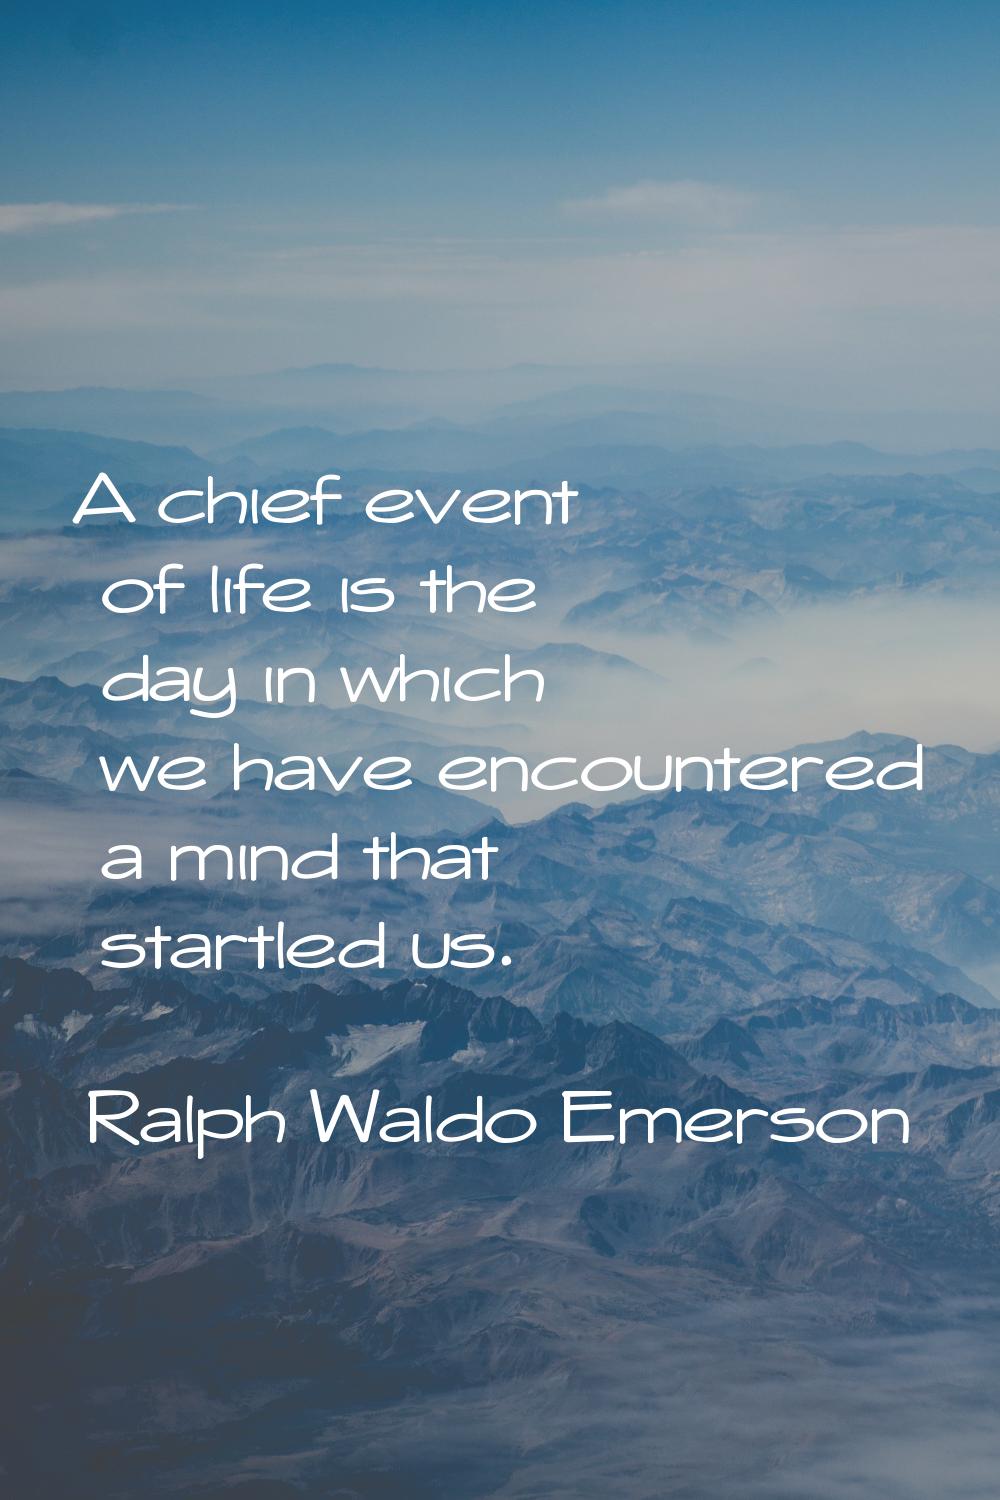 A chief event of life is the day in which we have encountered a mind that startled us.